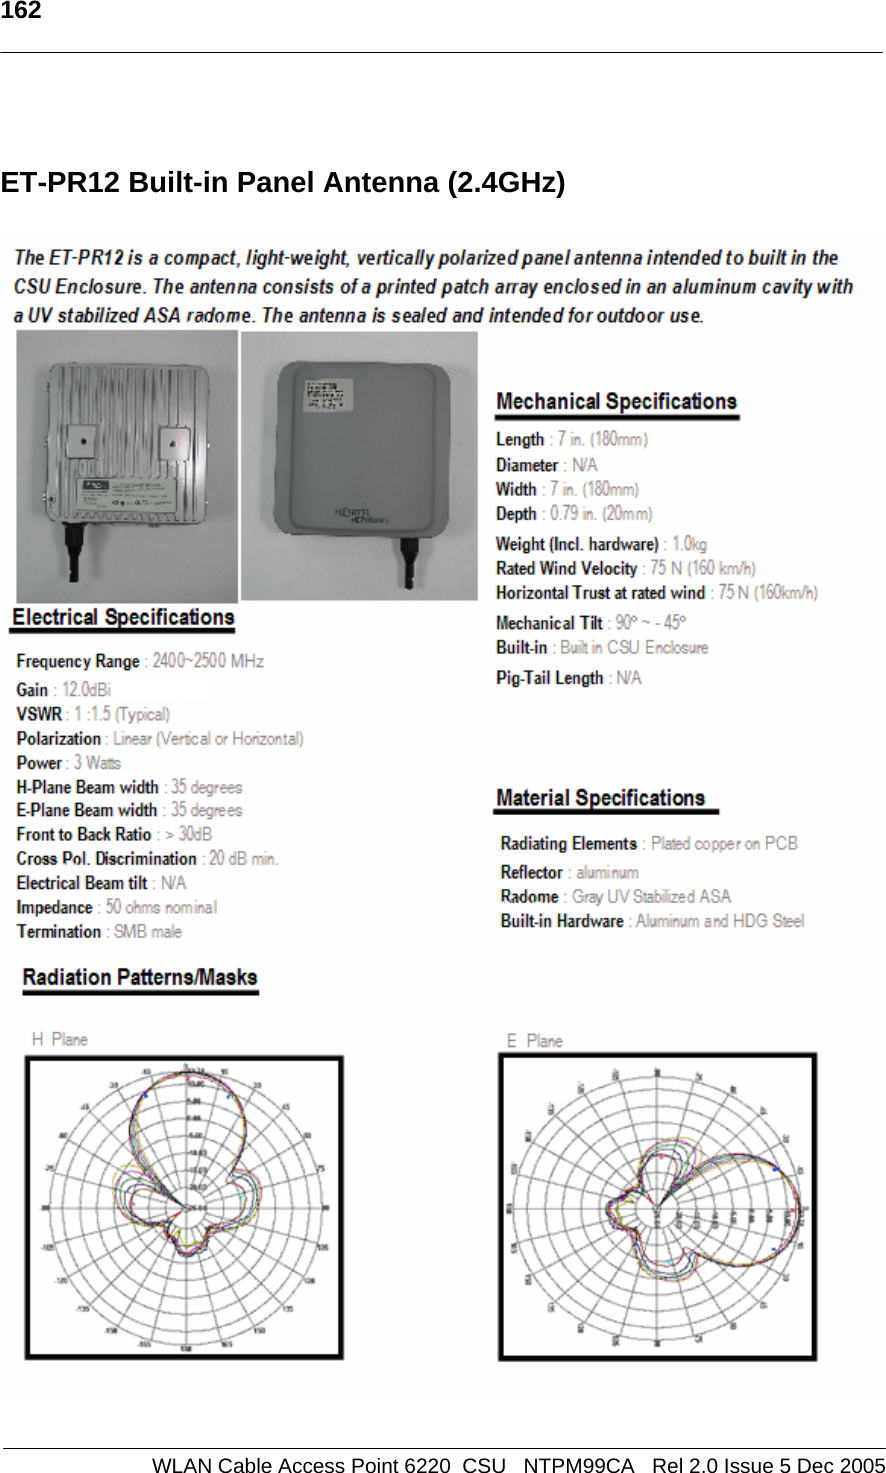   162   WLAN Cable Access Point 6220  CSU   NTPM99CA   Rel 2.0 Issue 5 Dec 2005   ET-PR12 Built-in Panel Antenna (2.4GHz)    